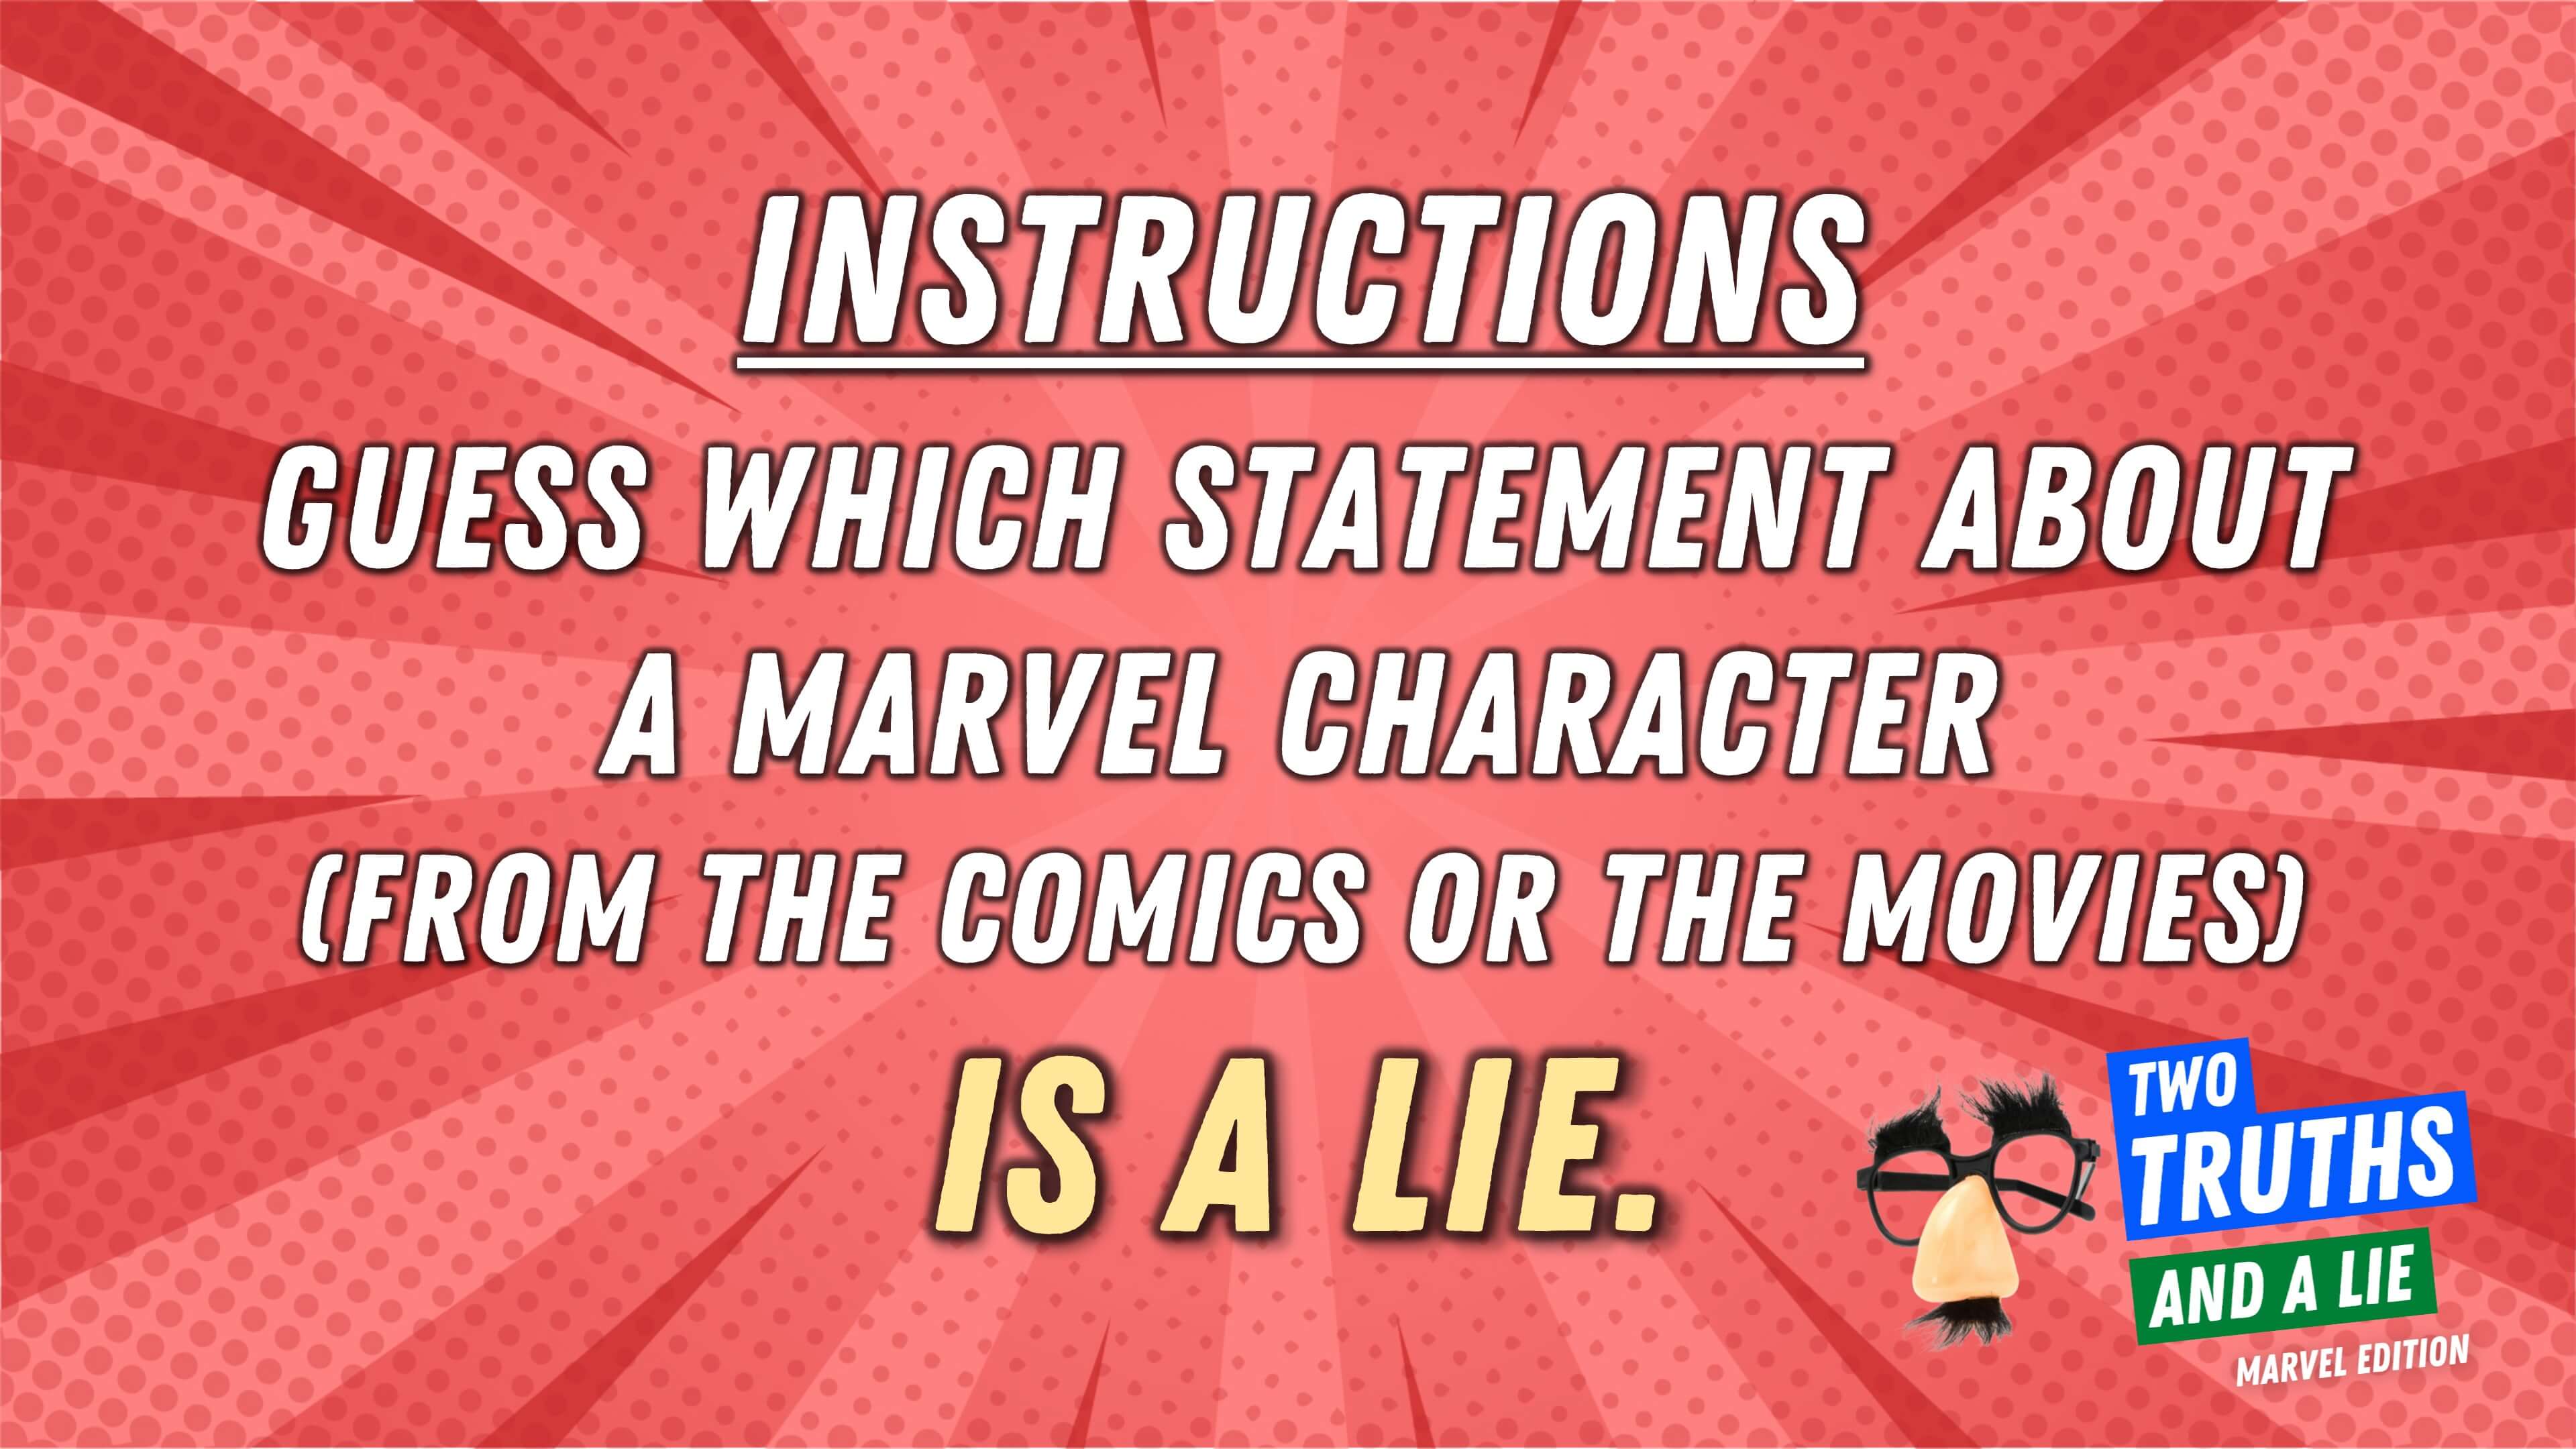 Two Truths And A Lie: Marvel Edition